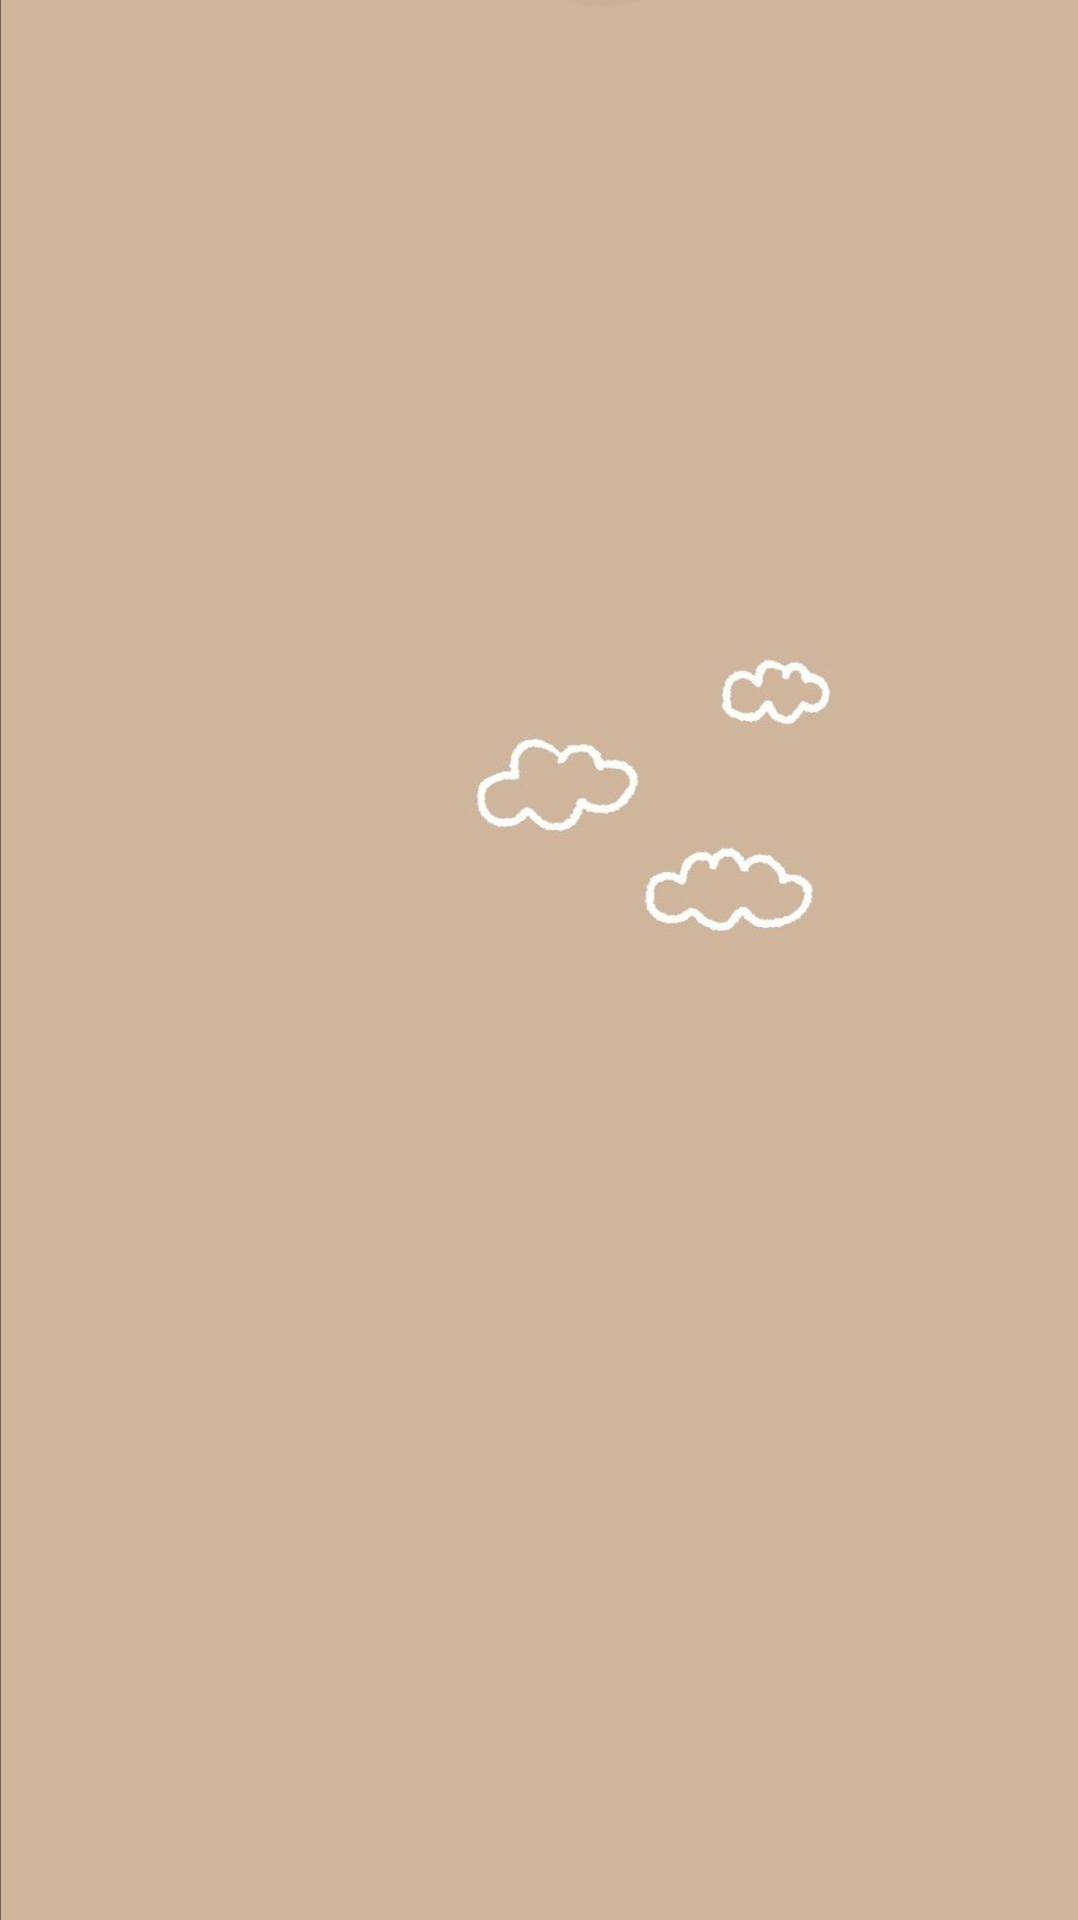 Aesthetic Clouds On Beige Background Wallpaper